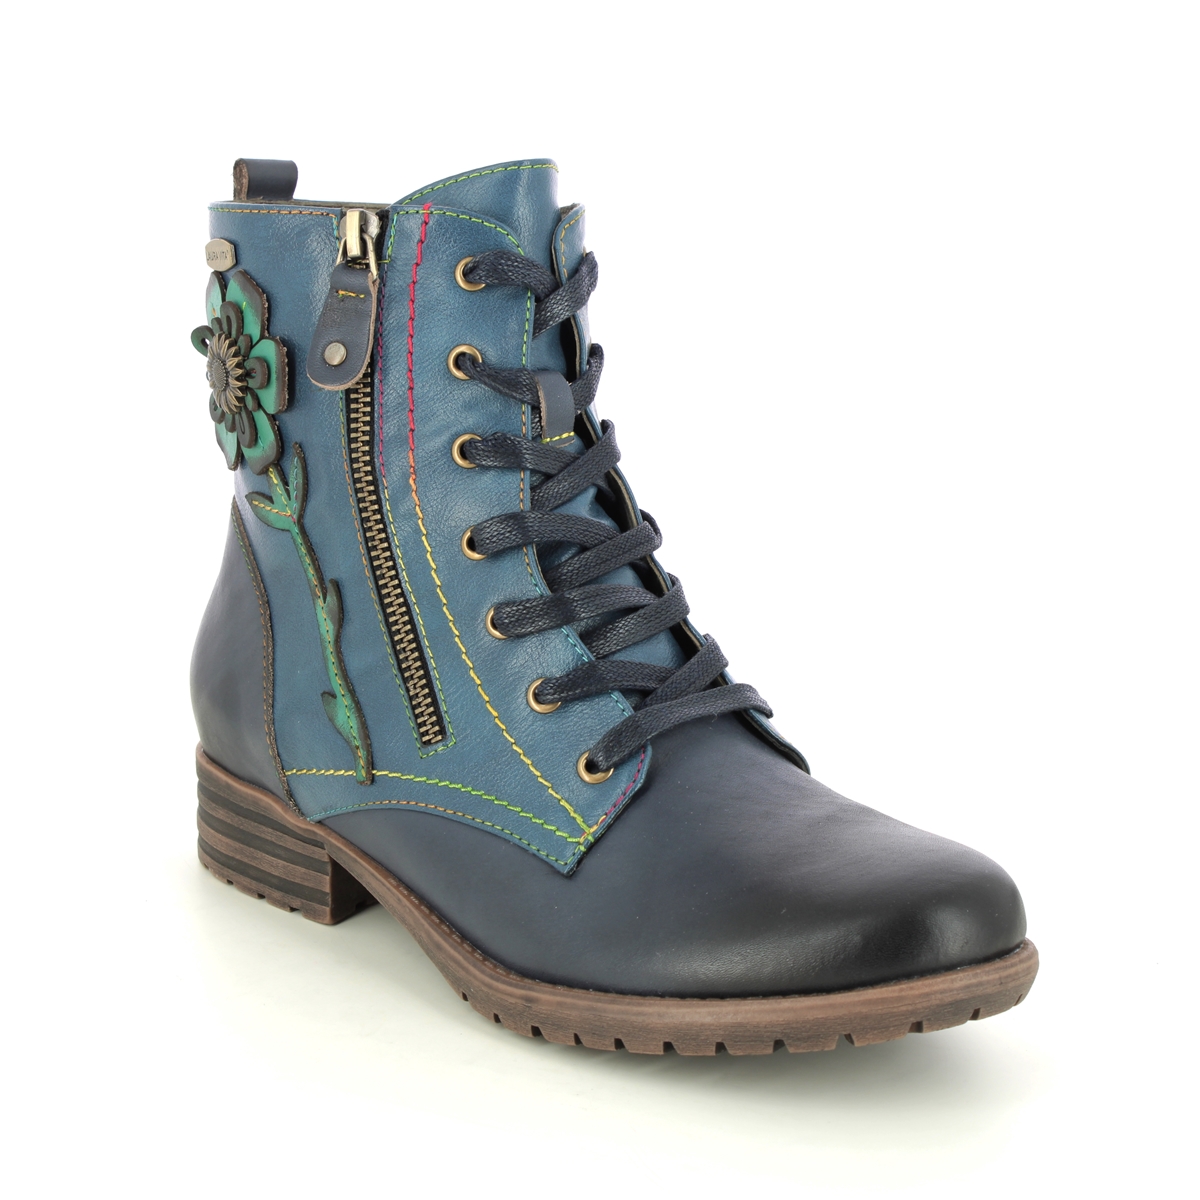 Laura Vita - Gacmayo 86 Zip (Blue Leather) 4395-75 In Size 38 In Floral Blue Leather